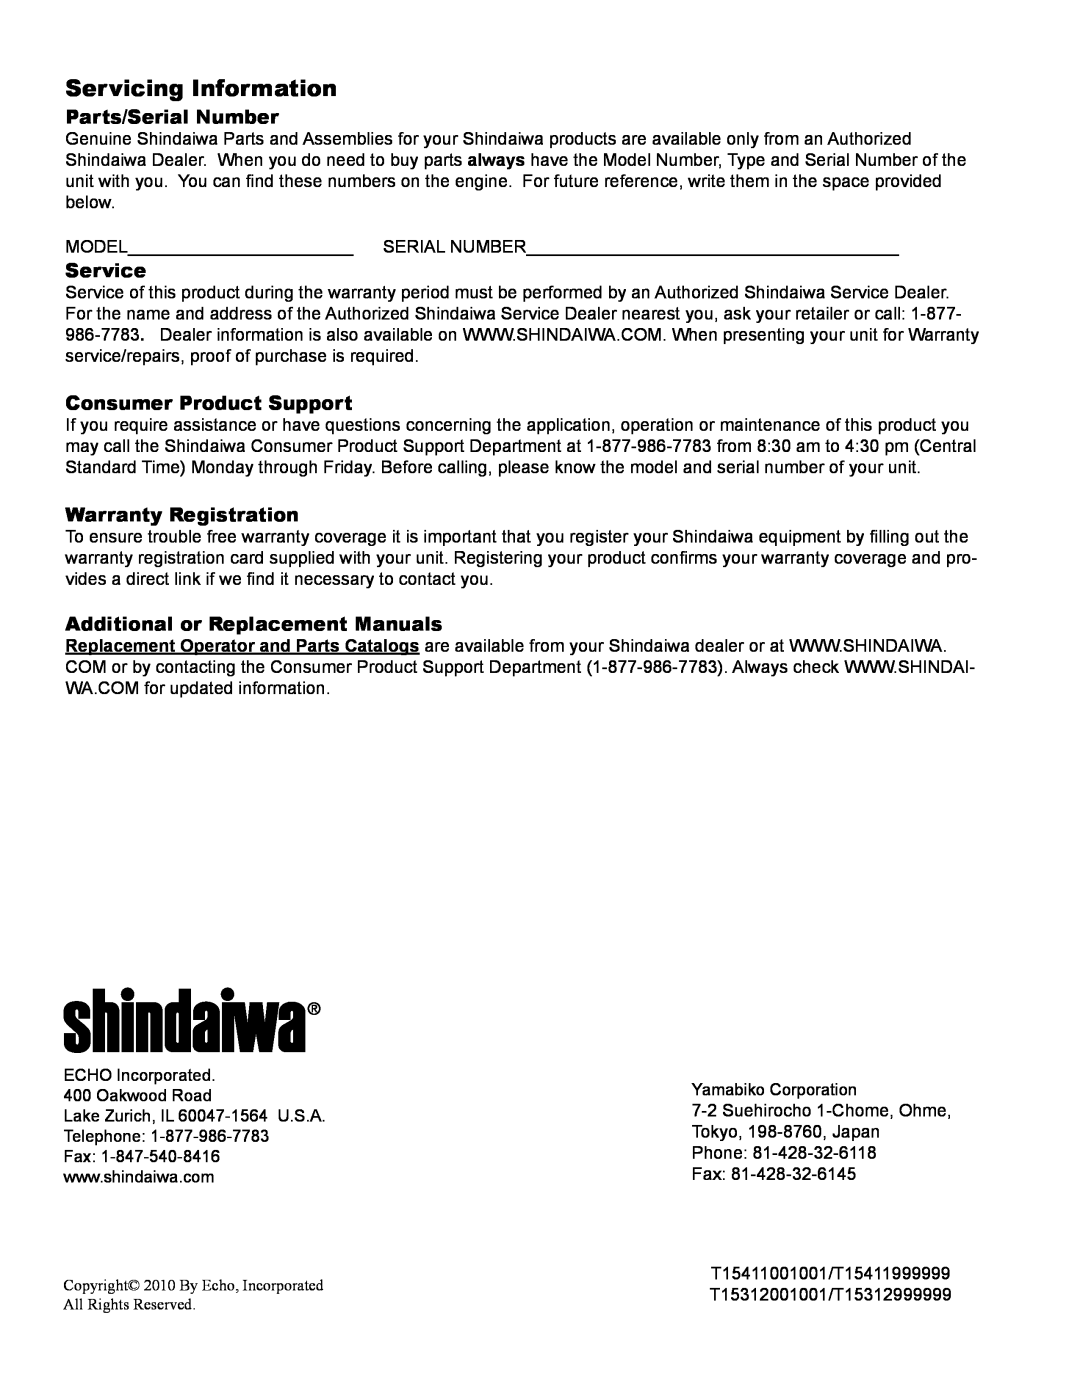 Shindaiwa X7502891100 Servicing Information, Parts/Serial Number, Service, Consumer Product Support, Warranty Registration 